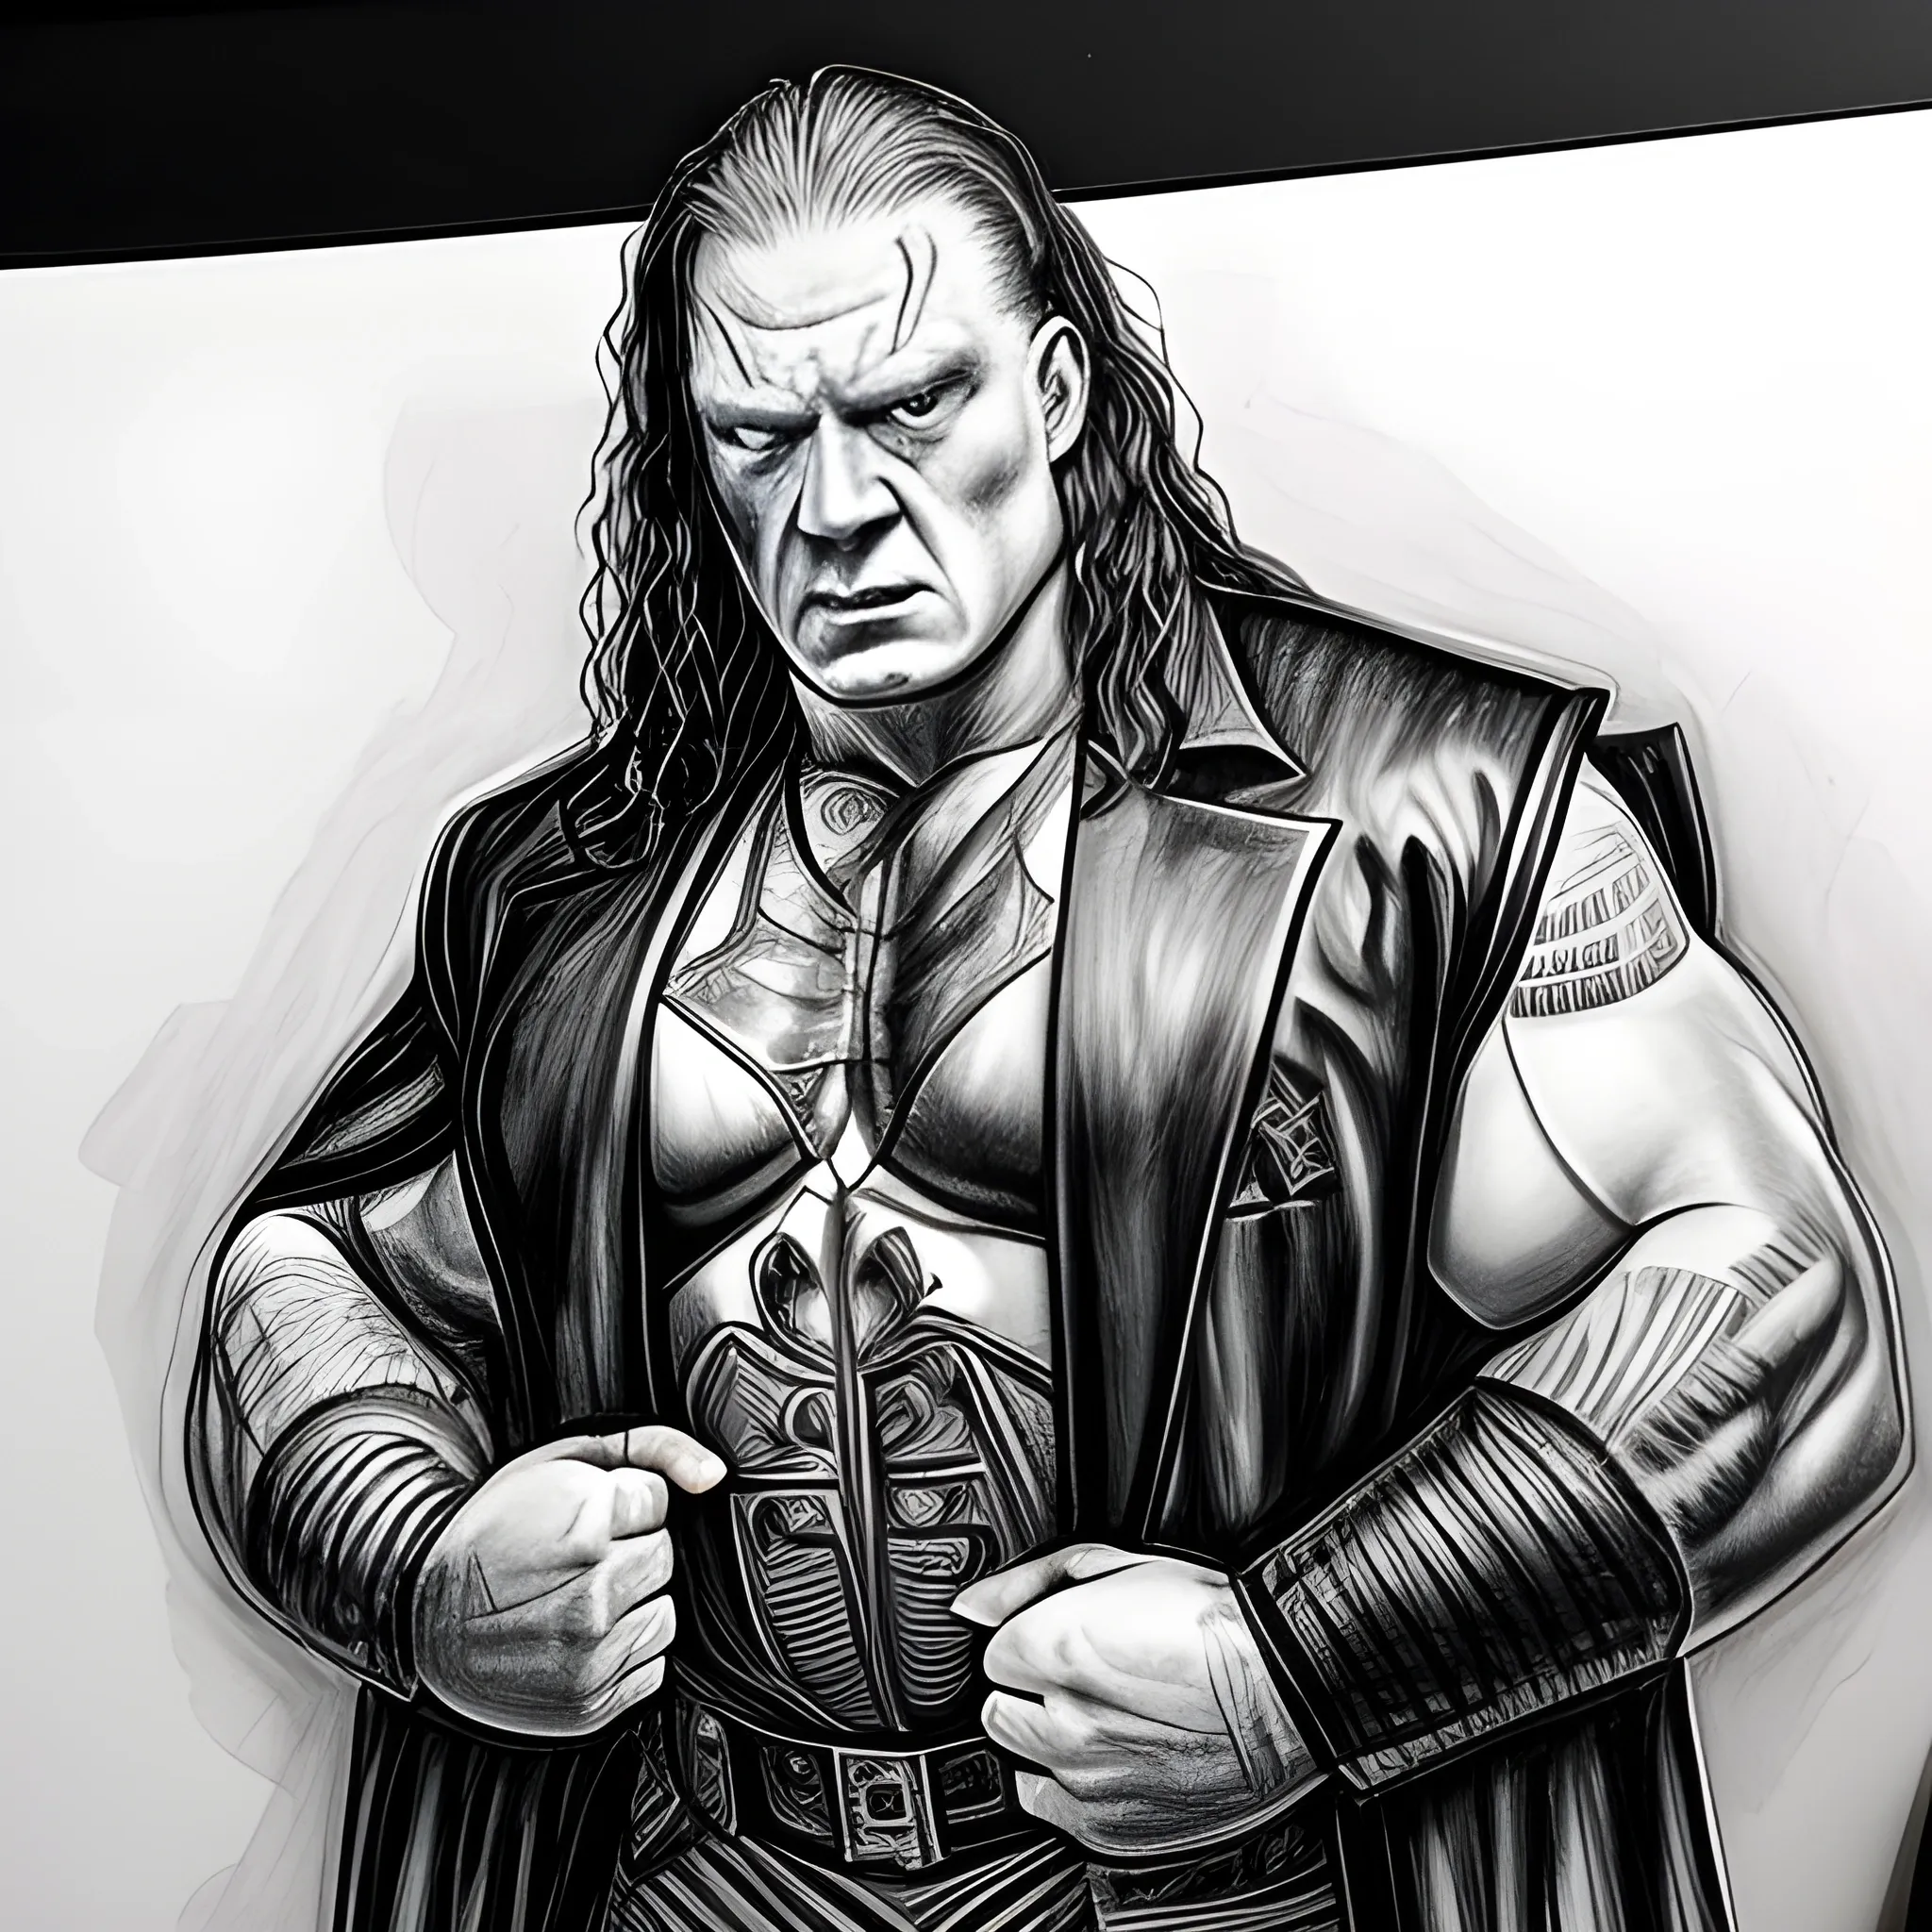 undertaker stands one side and brock lesnar with 21 wwe champions stands another side and the number like 21-0 shows on screen that shows the power of the undertaker, Pencil Sketch